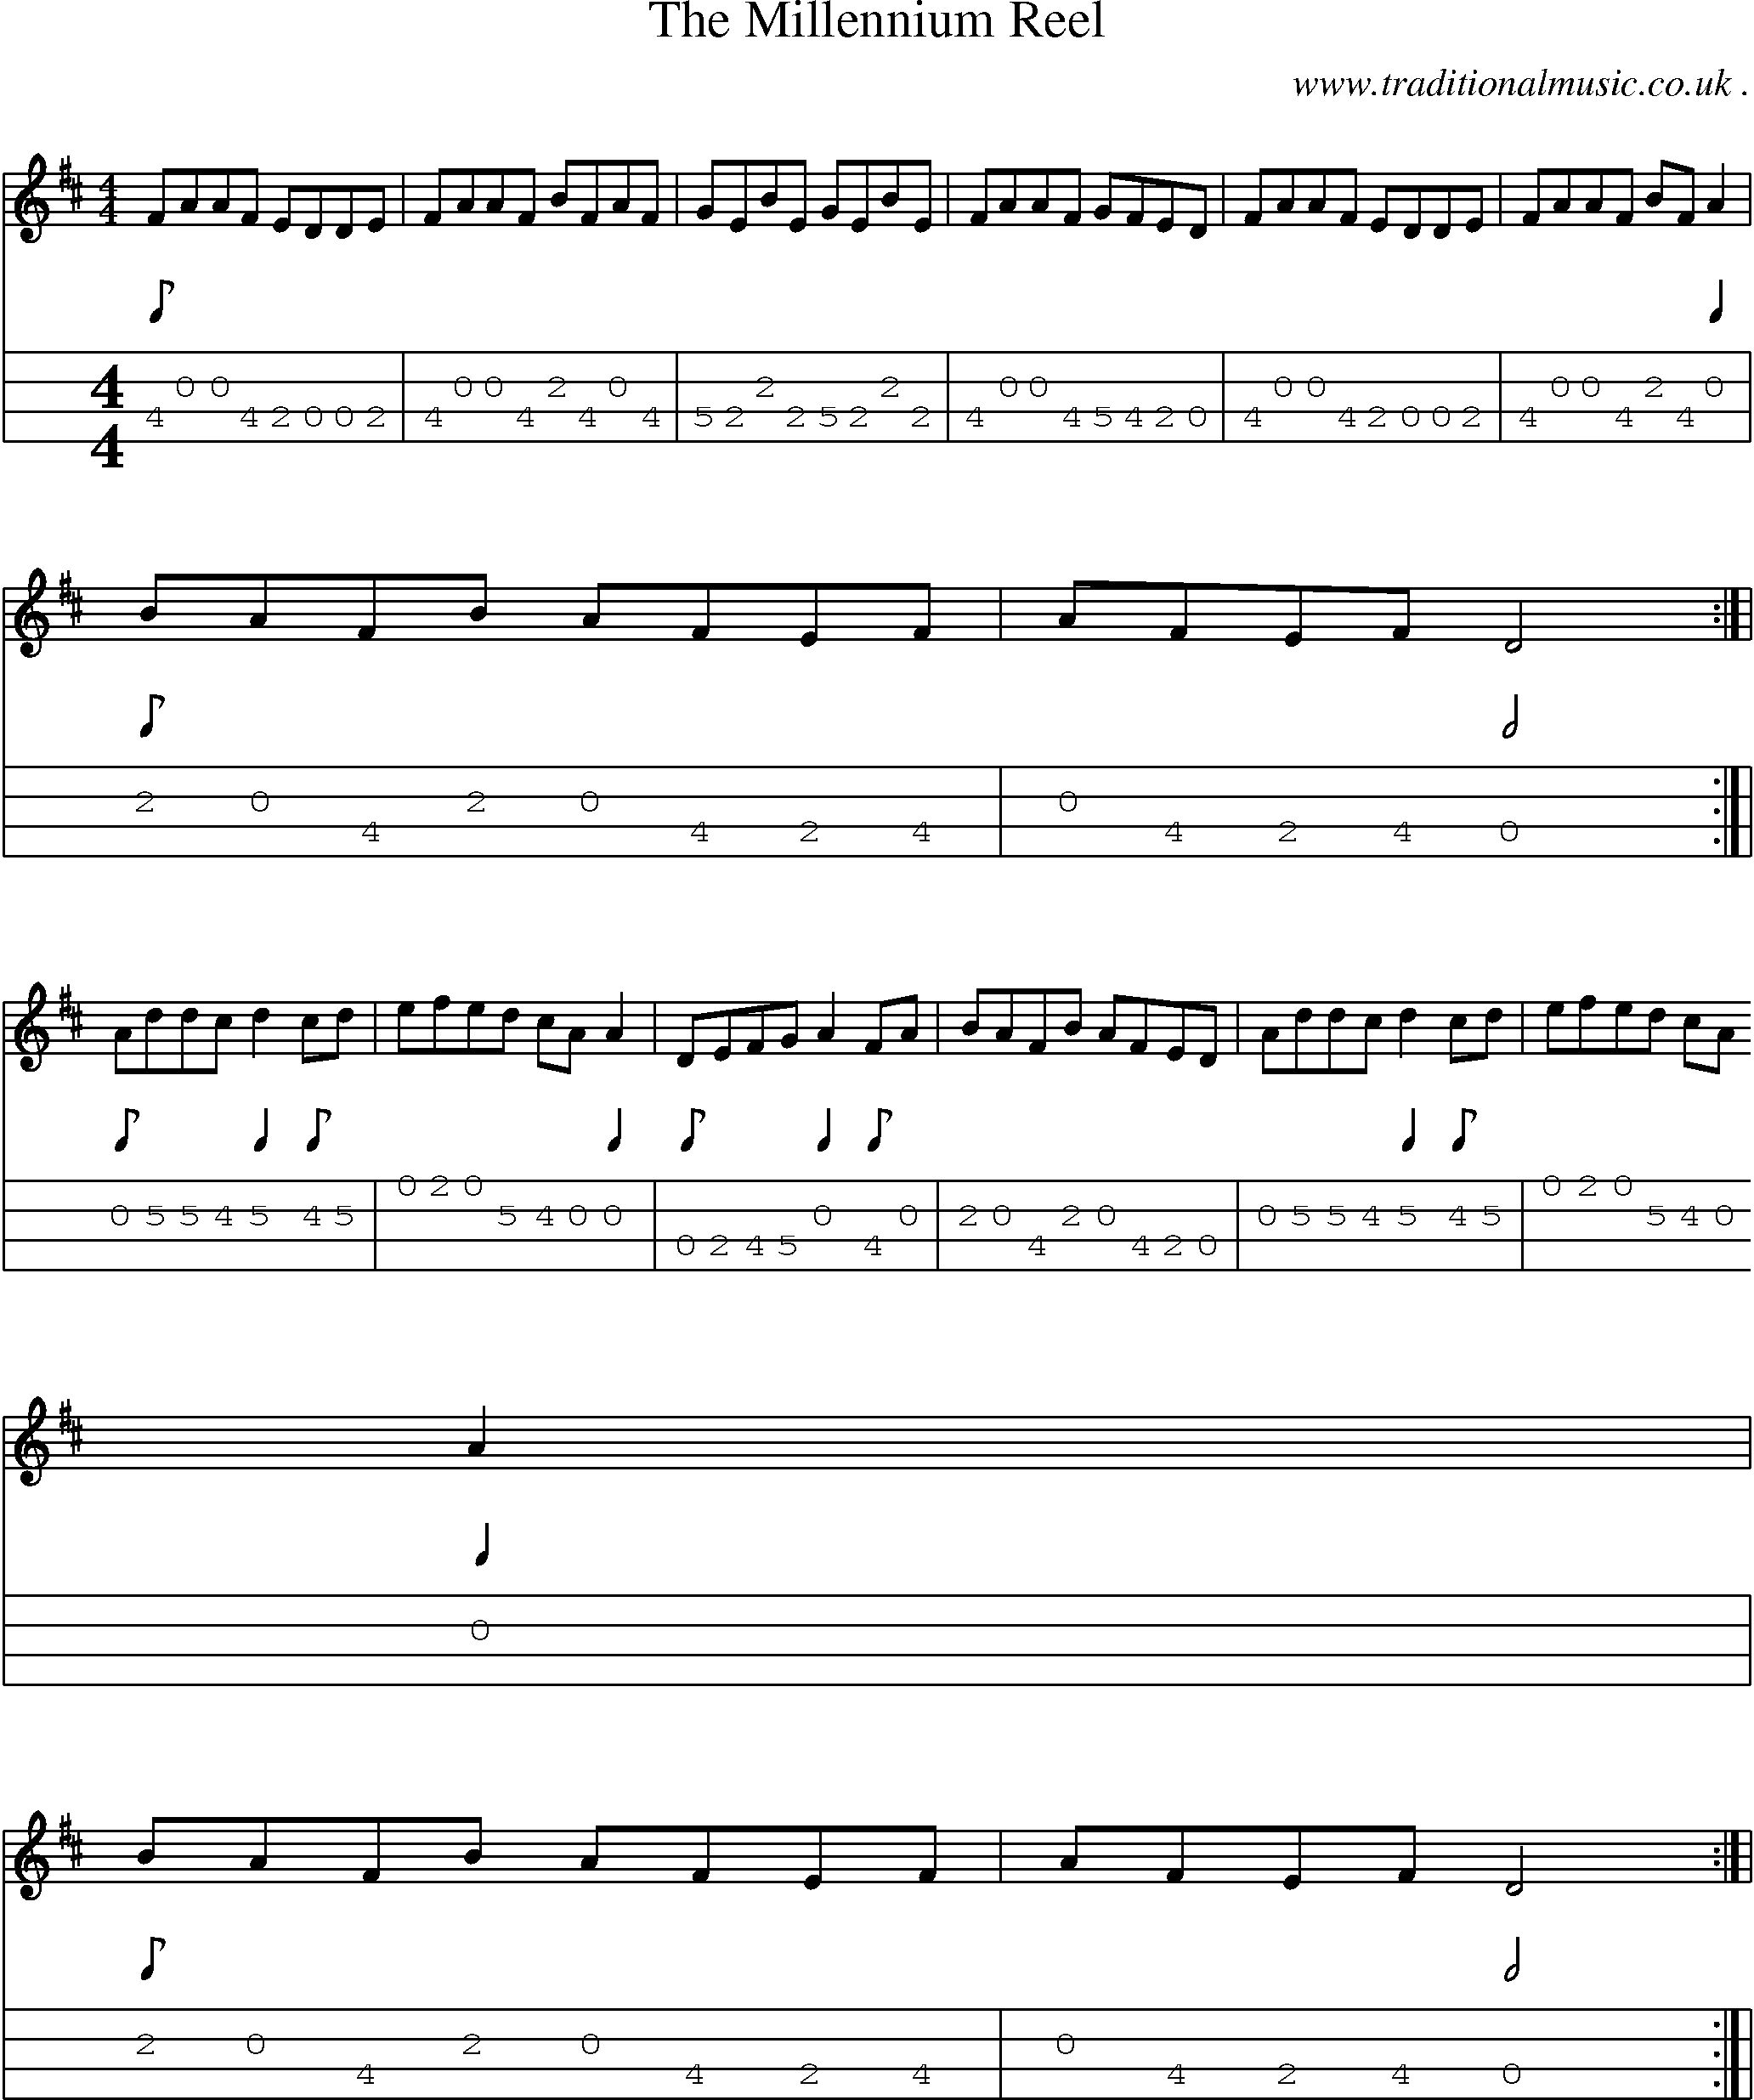 Sheet-Music and Mandolin Tabs for The Millennium Reel